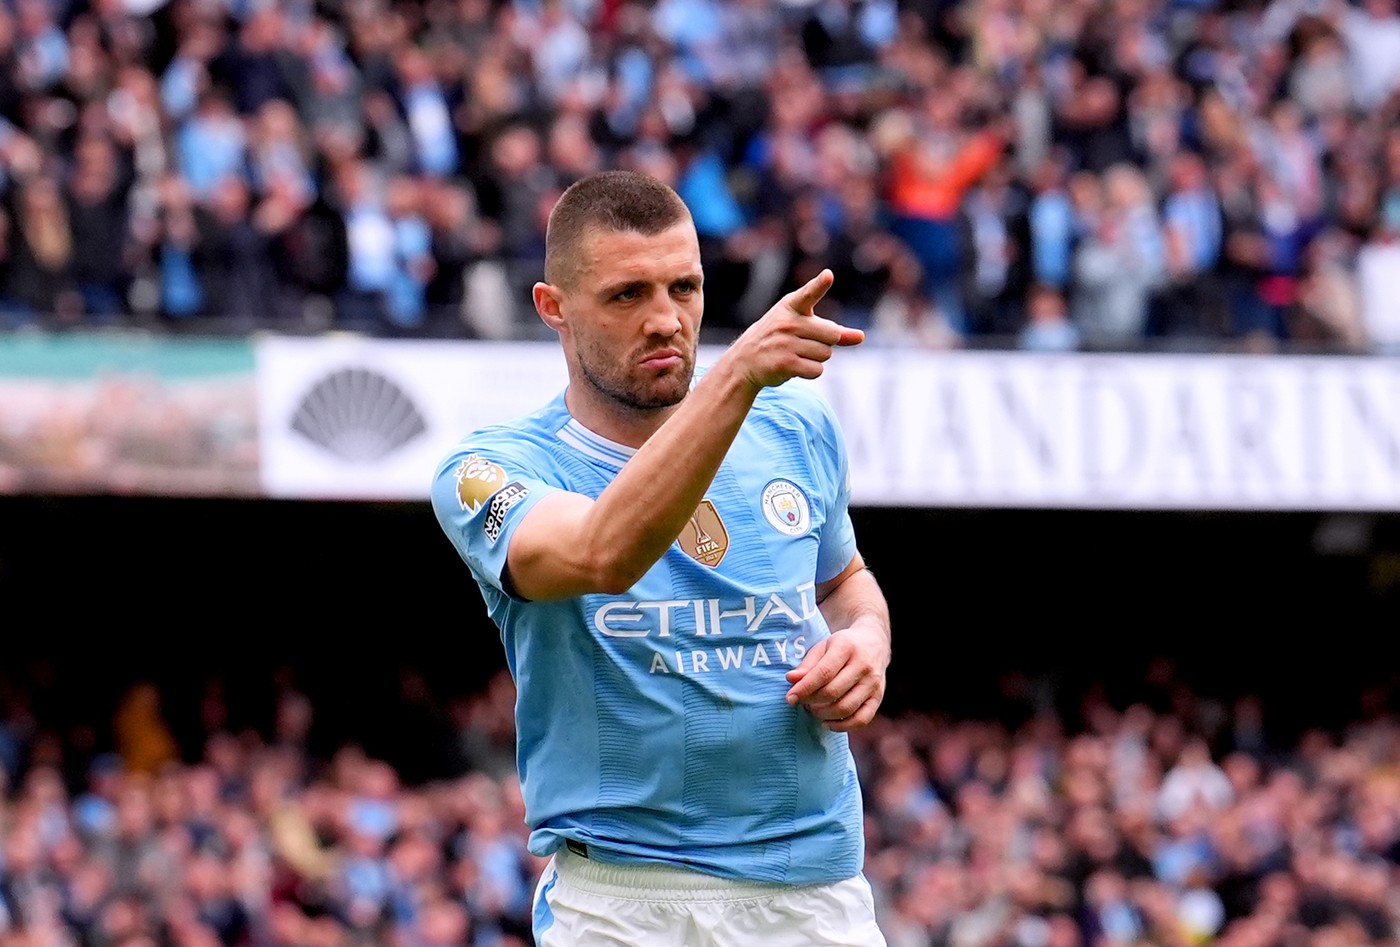 Manchester City's Mateo Kovacic celebrates scoring their side's second goal of the game during the Premier League match at the Etihad Stadium, Manchester. Picture date: Saturday April 13, 2024.,Image: 864511572, License: Rights-managed, Restrictions: EDITORIAL USE ONLY No use with unauthorised audio, video, data, fixture lists, club/league logos or "live" services. Online in-match use limited to 120 images, no video emulation. No use in betting, games or single club/league/player publications., Model Release: no, Credit line: Martin Rickett / PA Images / Profimedia